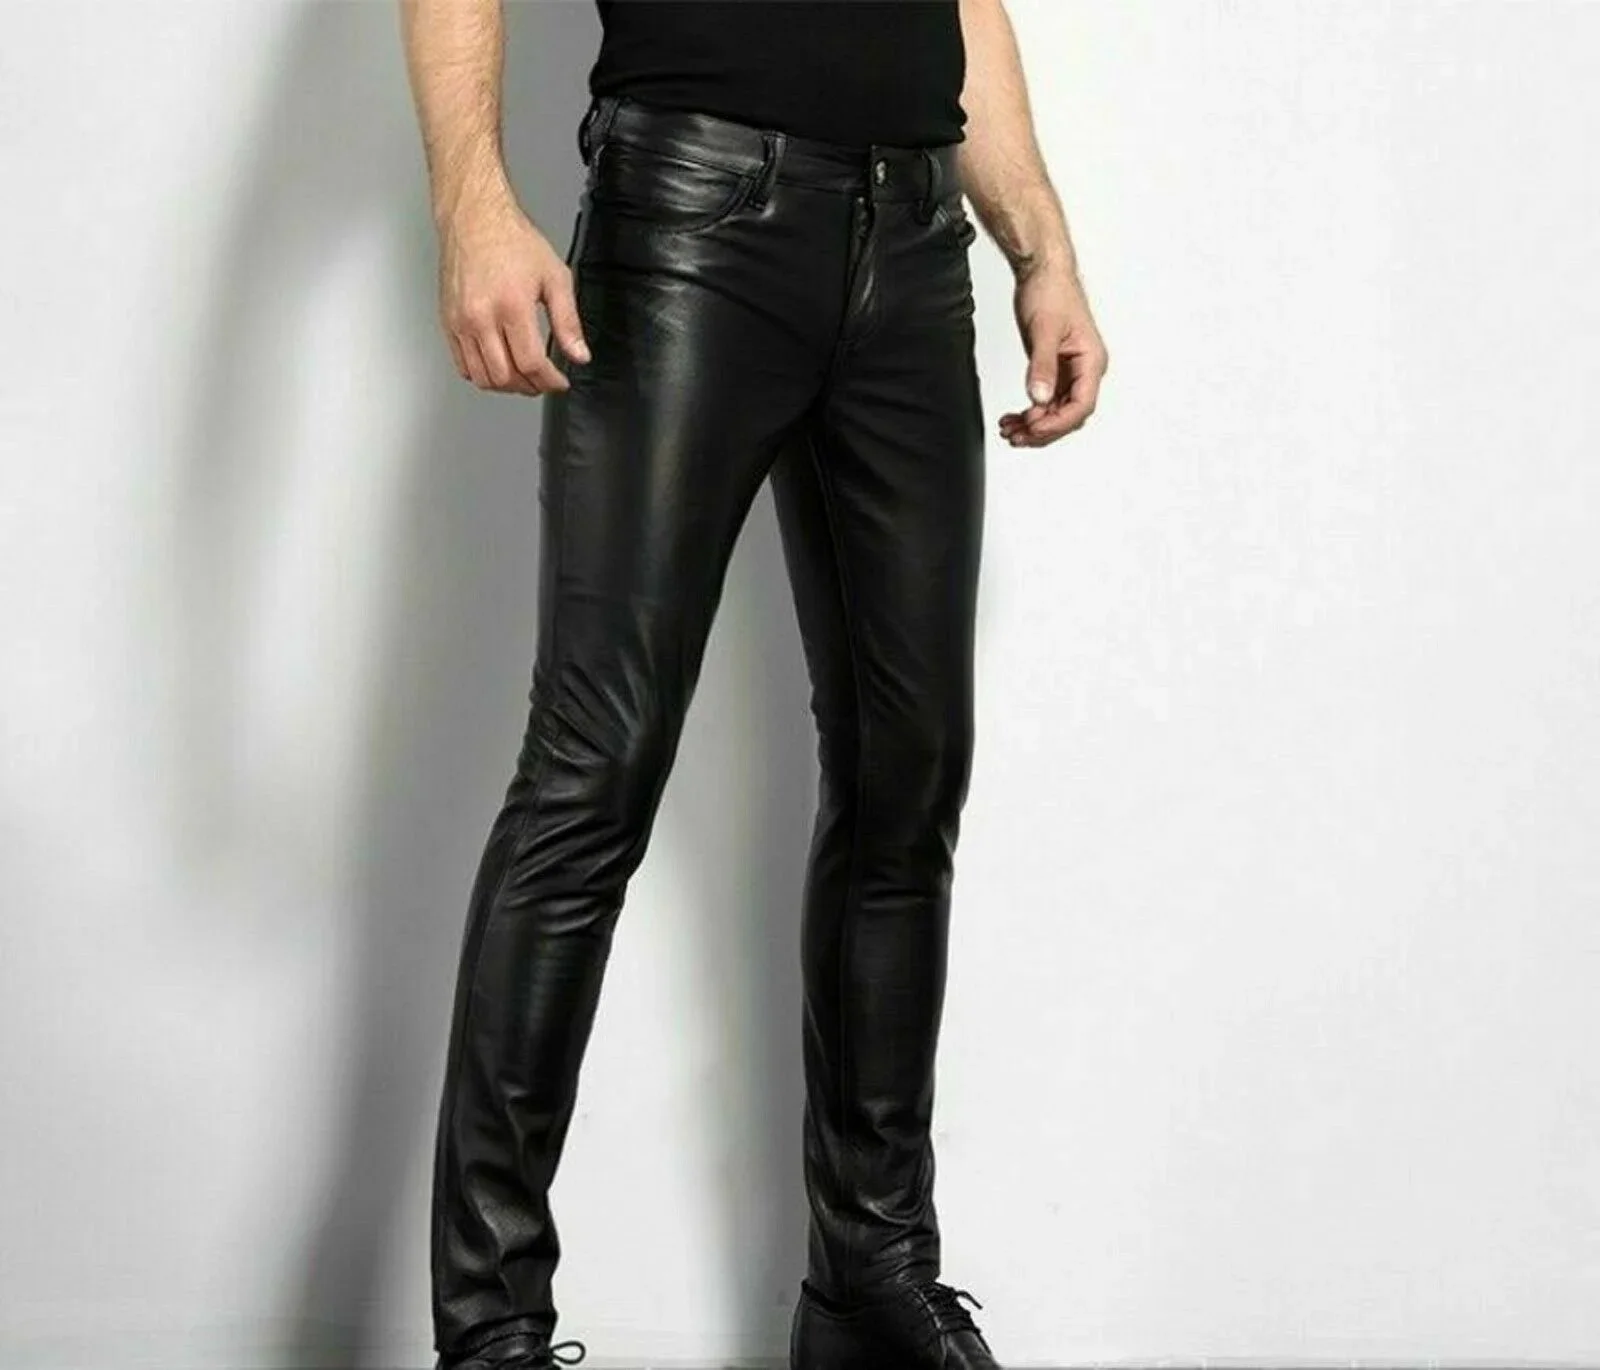 Spring Fashion Men's Fashion Rock Style PU Leather Pants Men's faux leather slim-fit motorcycle trousers 2